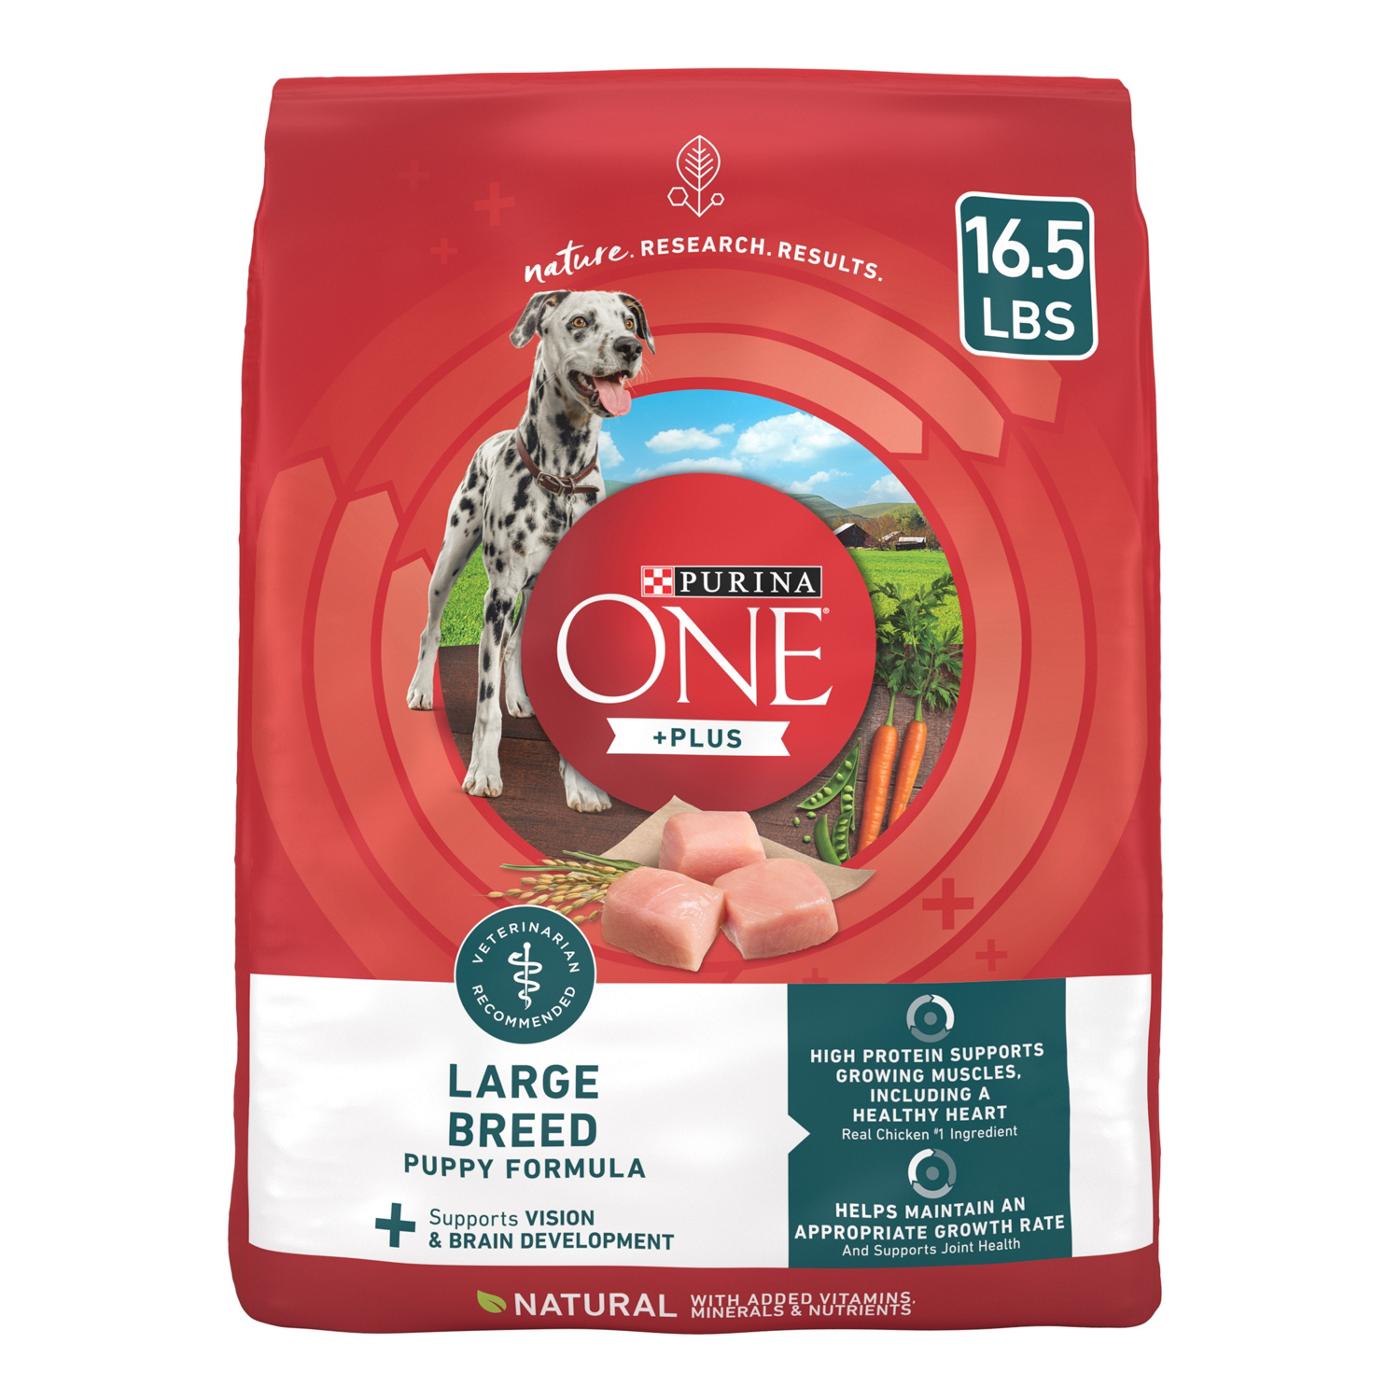 Purina ONE Purina ONE Plus Large Breed Puppy Food Dry Formula; image 1 of 6